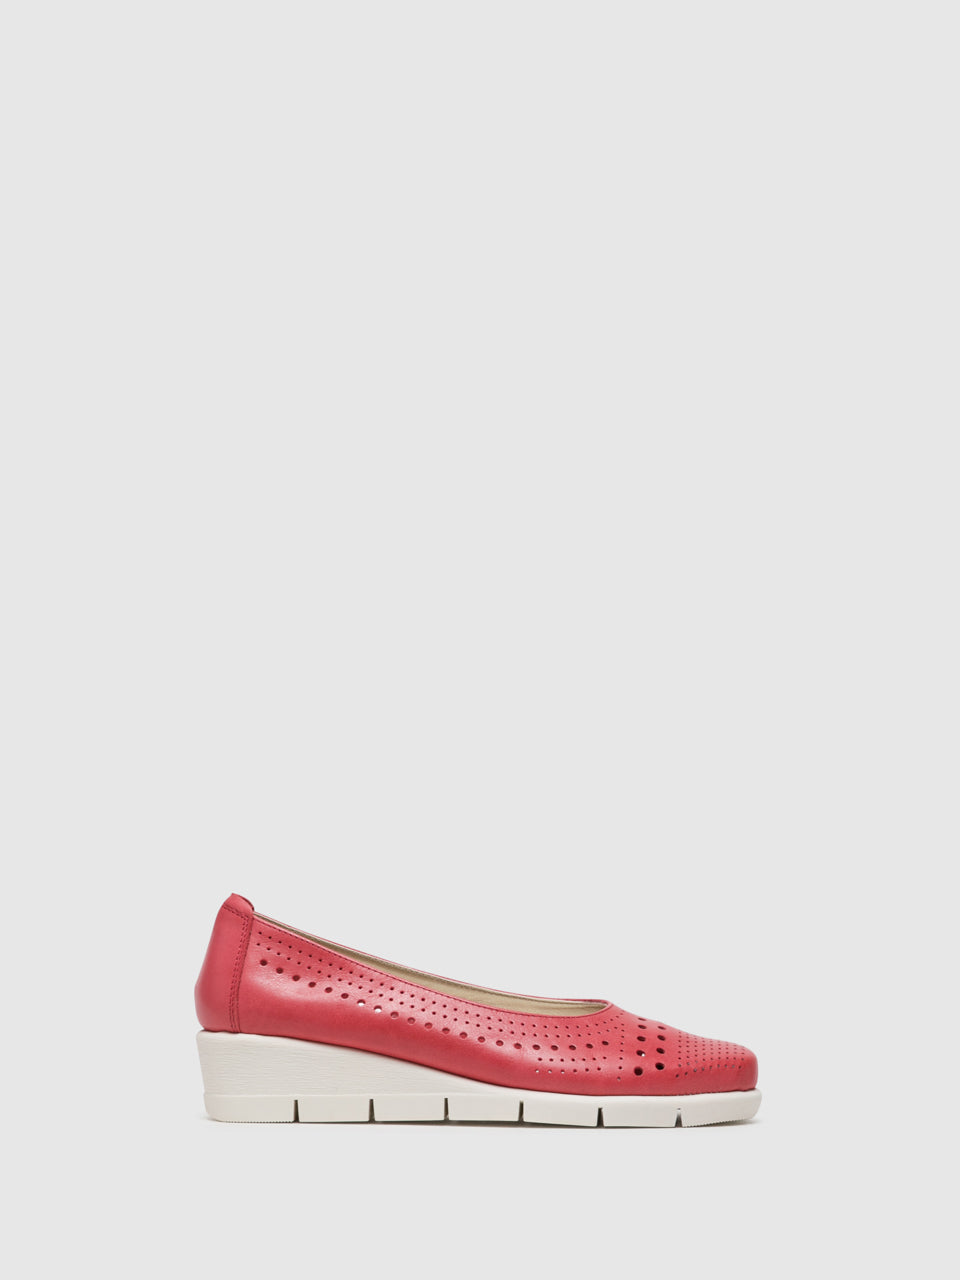 The Flexx Red Wedge Shoes